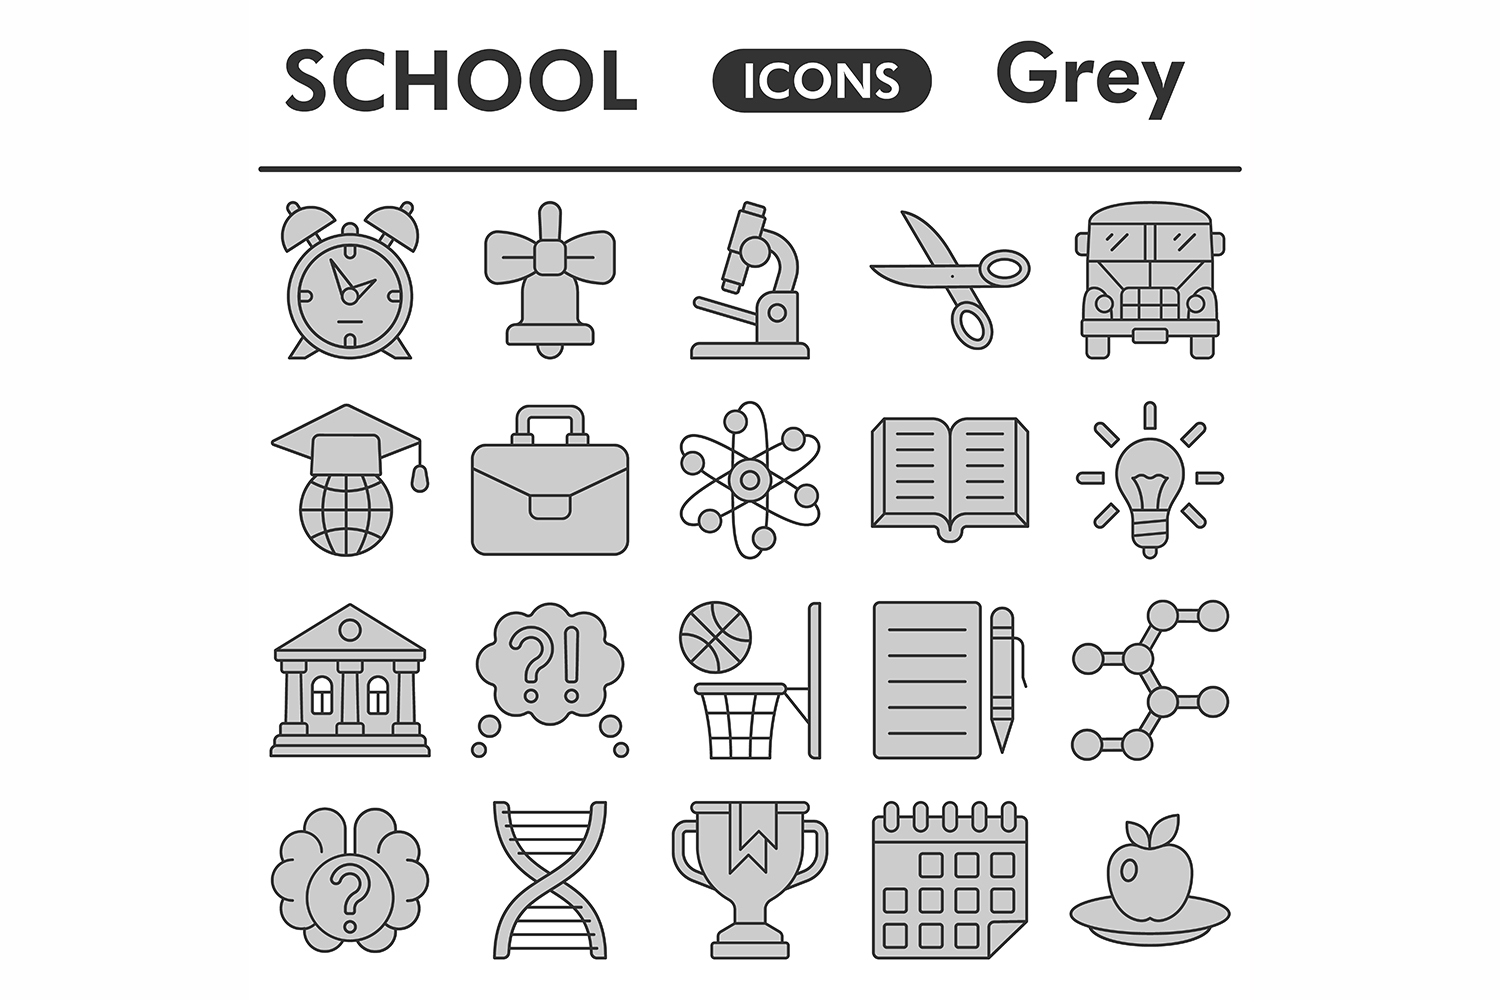 School icons set, gray style pinterest preview image.